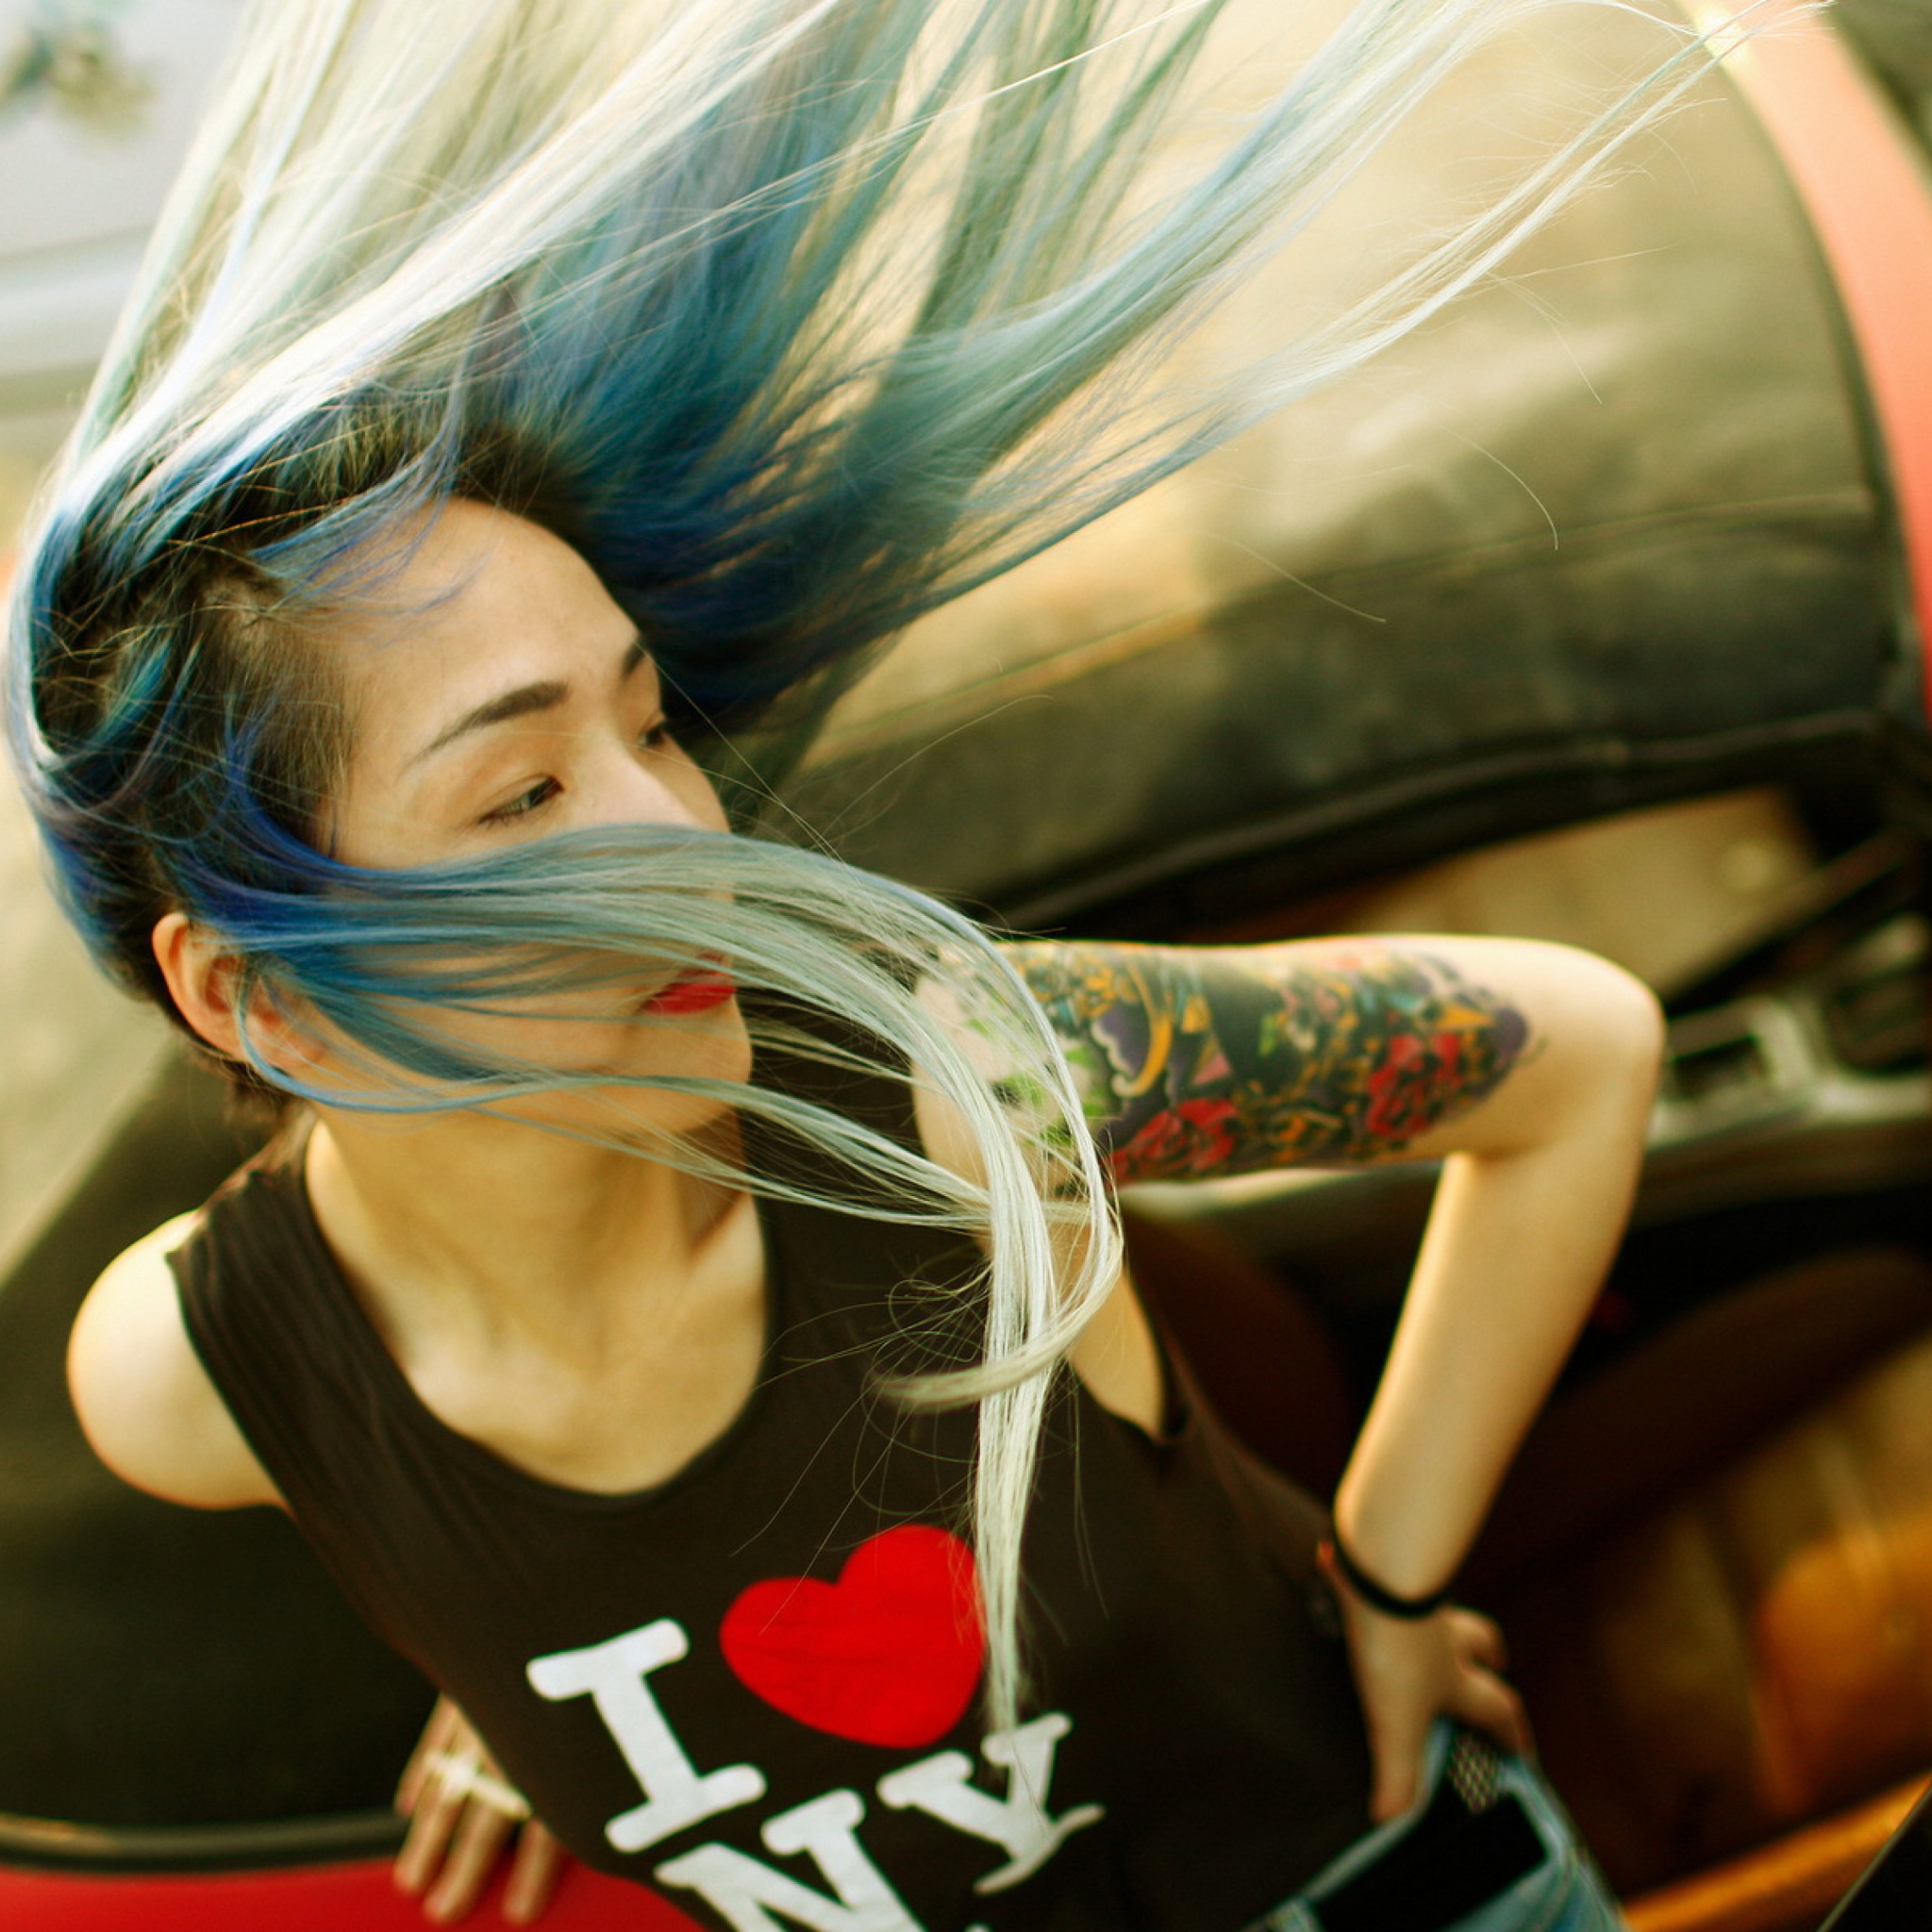 Das Cool Asian Girl With Blue Hair & I Love NY T-shirt Wallpaper 2048x2048